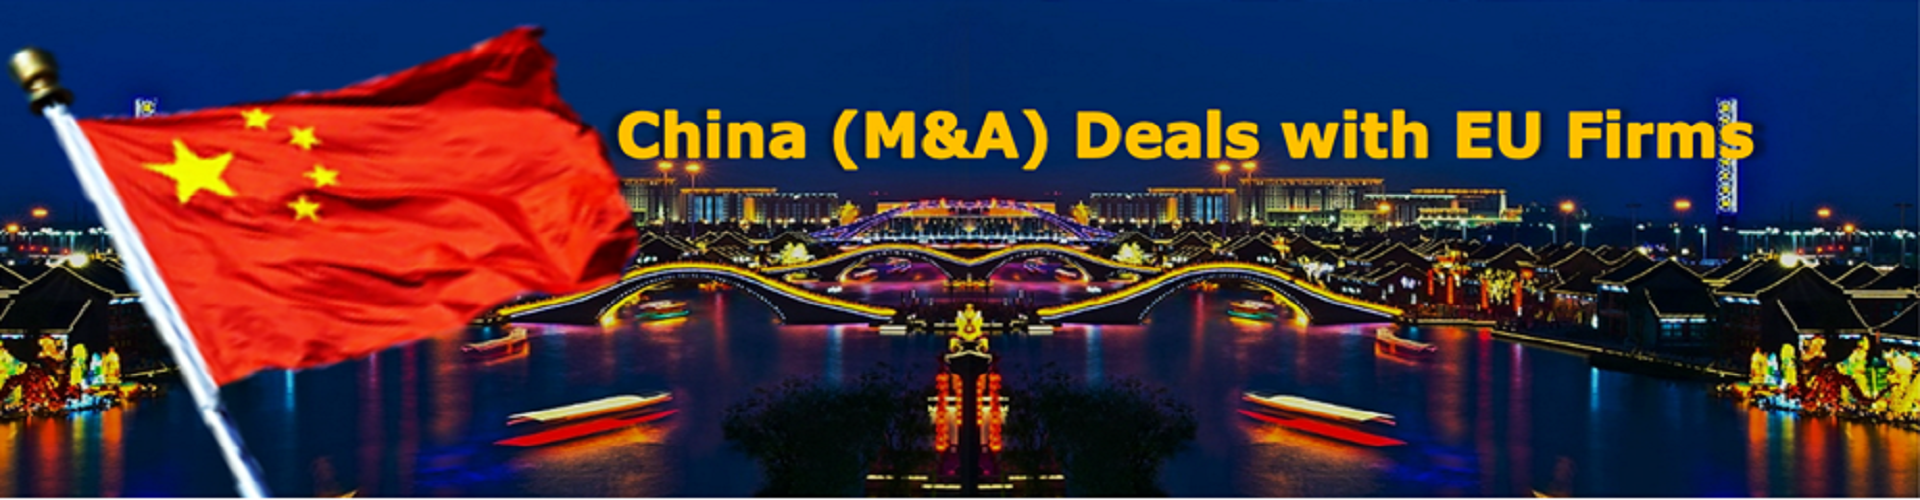 database-China-M&A-deals-with-European-firms